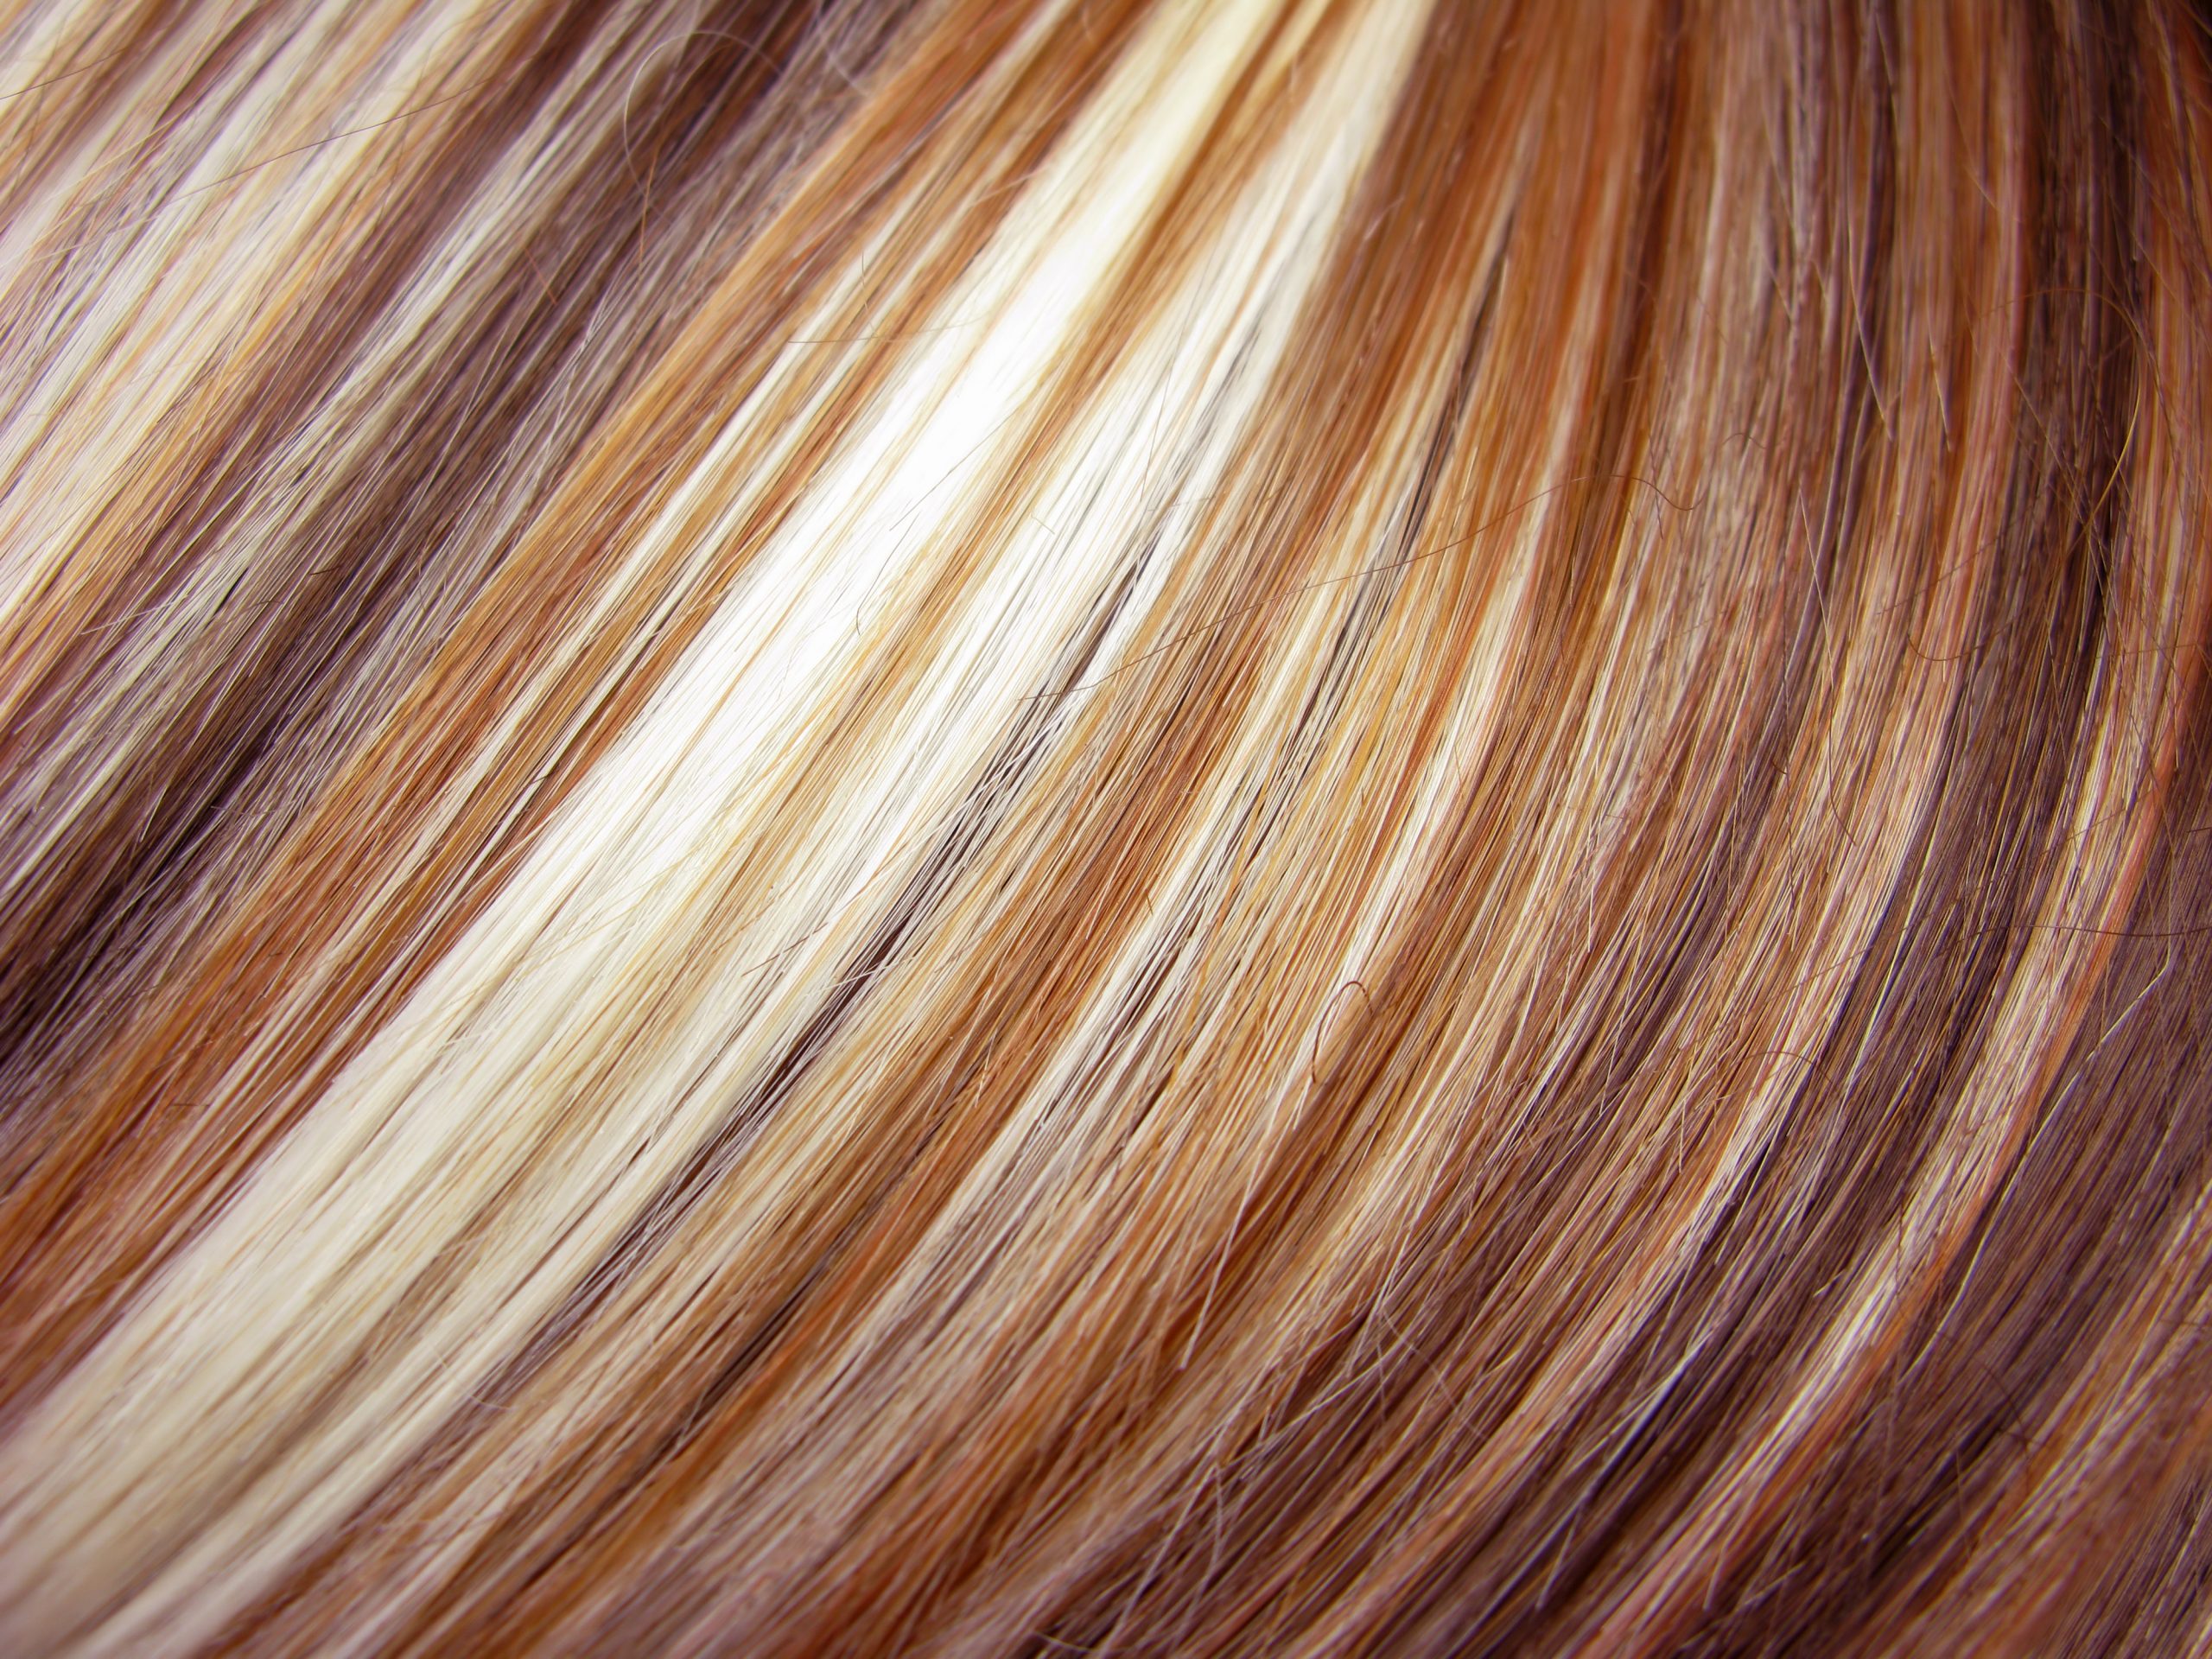 An image of many colors of hair possible at a Damascus hair color salon